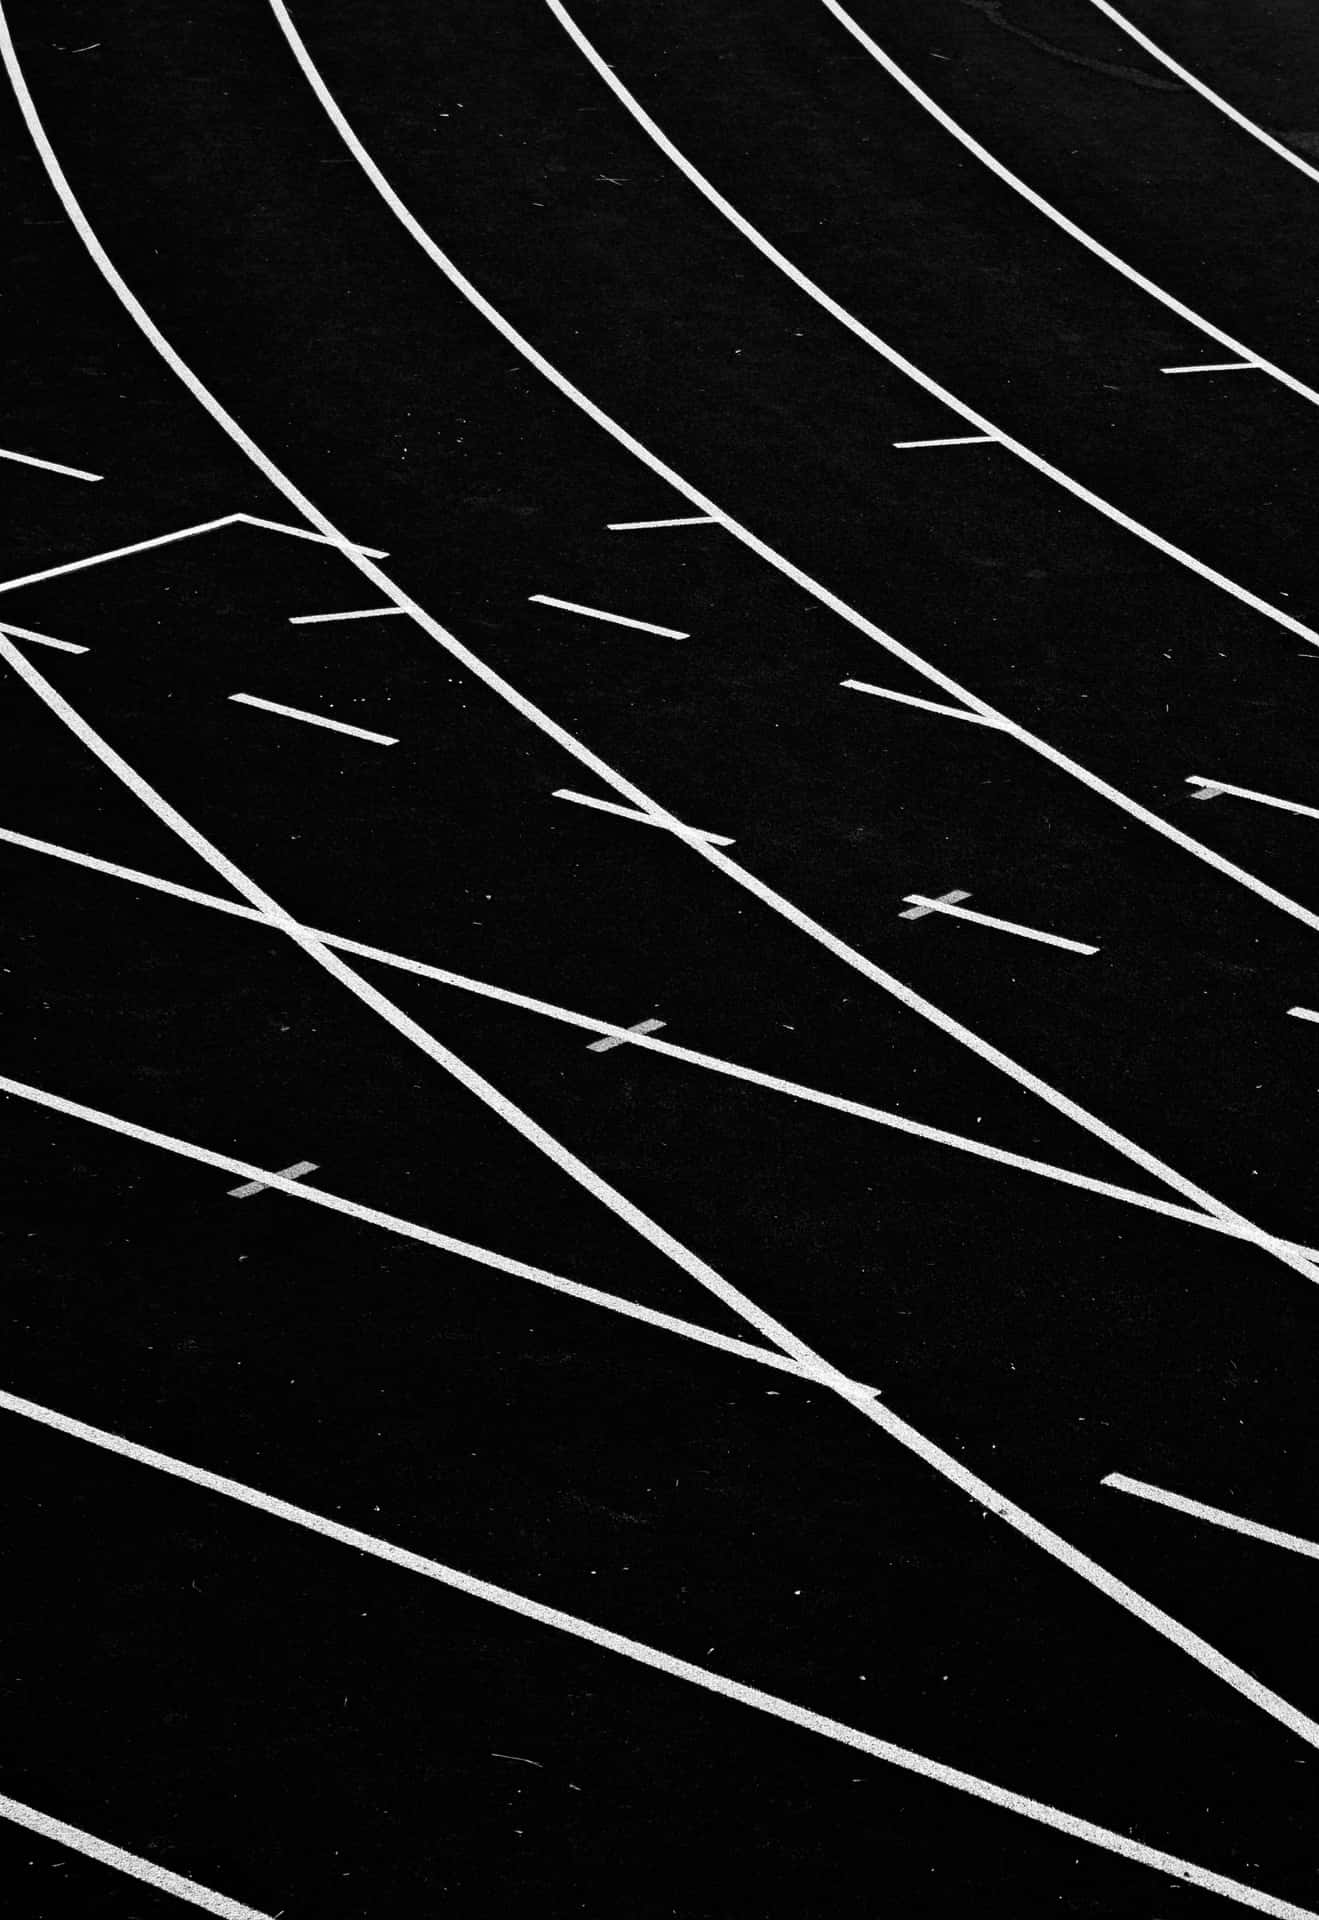 Abstract Blackand White Curves Wallpaper